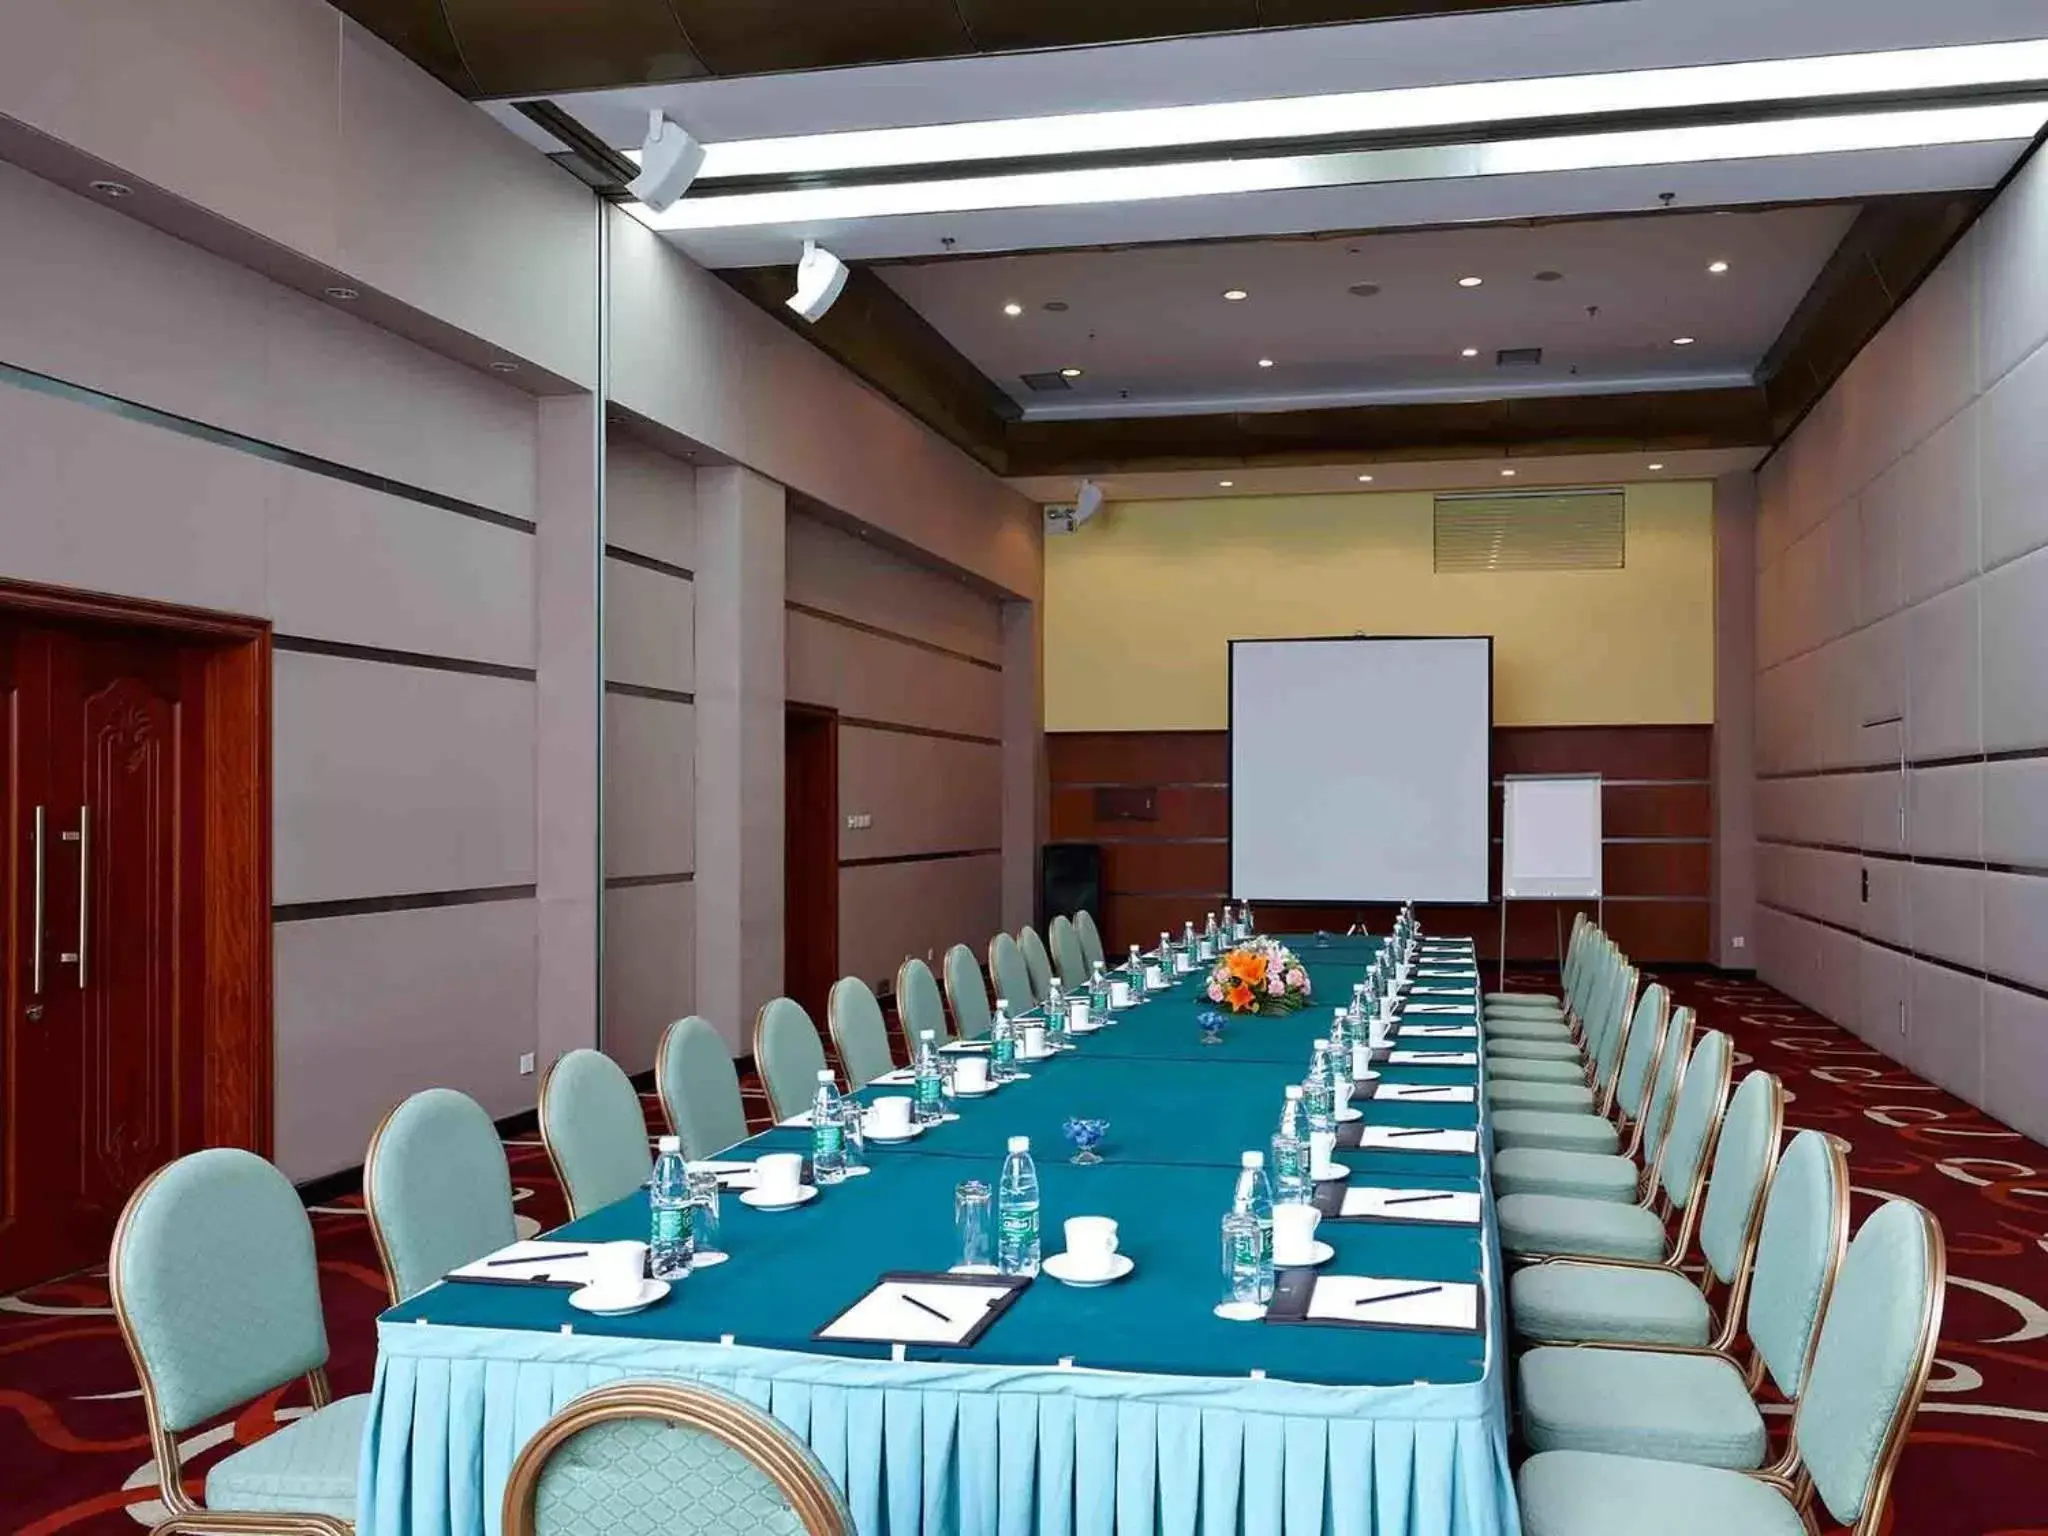 Banquet/Function facilities in CITIC Hotel Beijing Airport